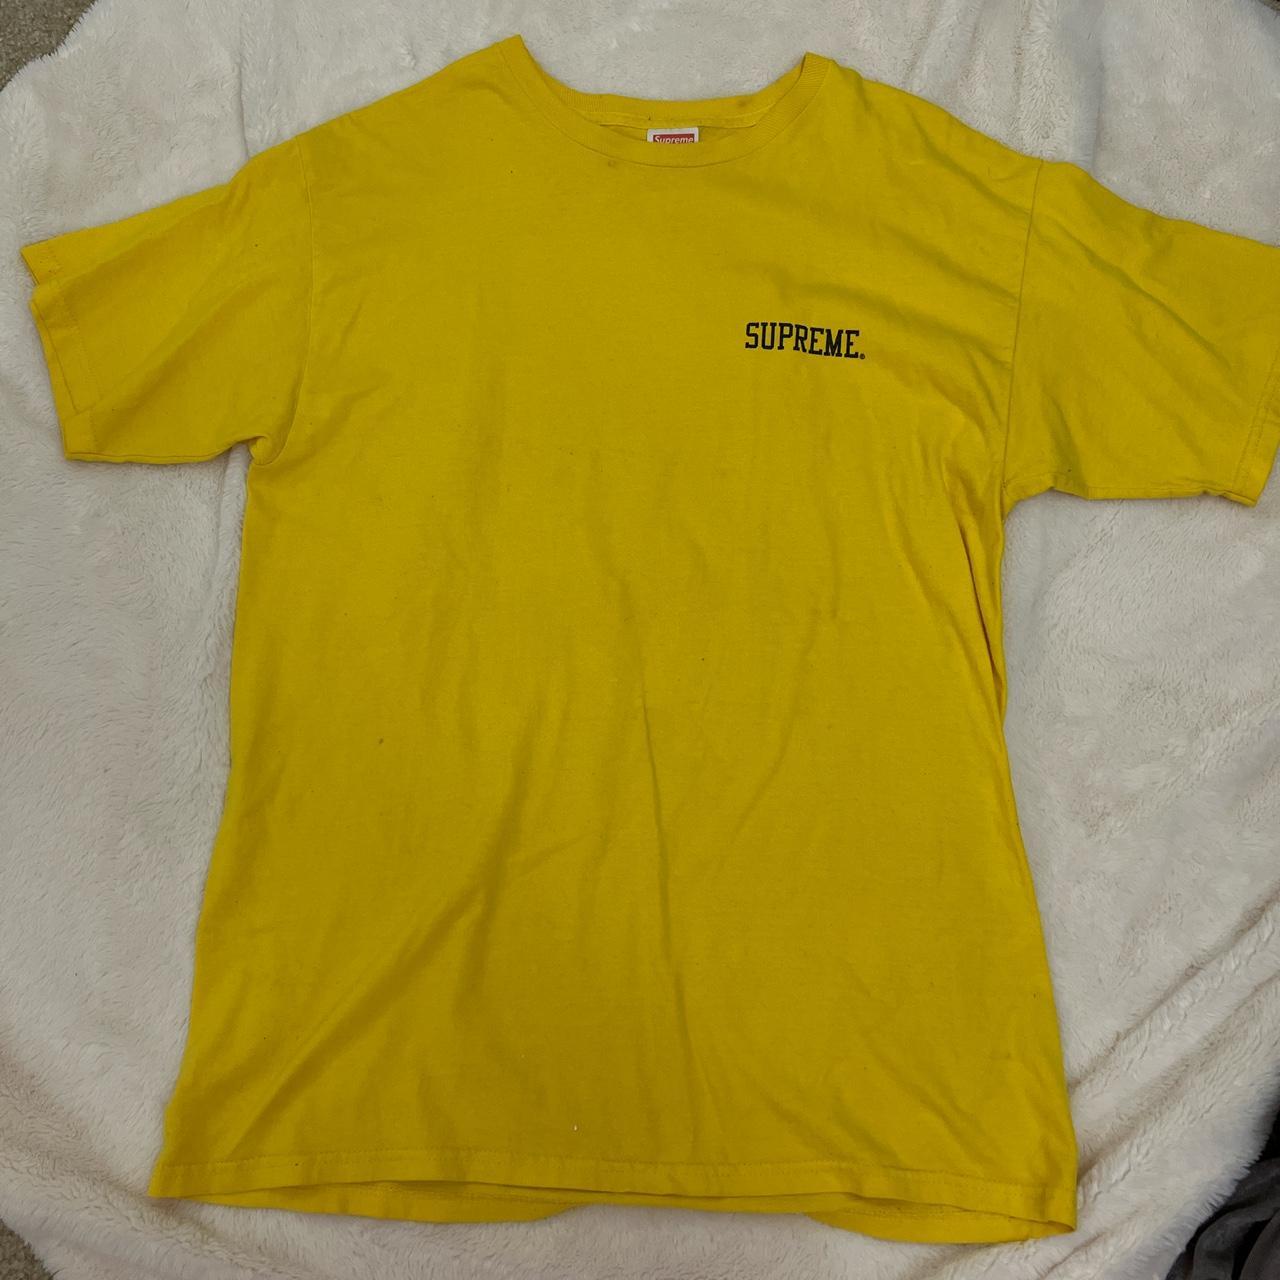 Stax Records - Stax Yellow Finger Snap T-Shirt - Stax Records